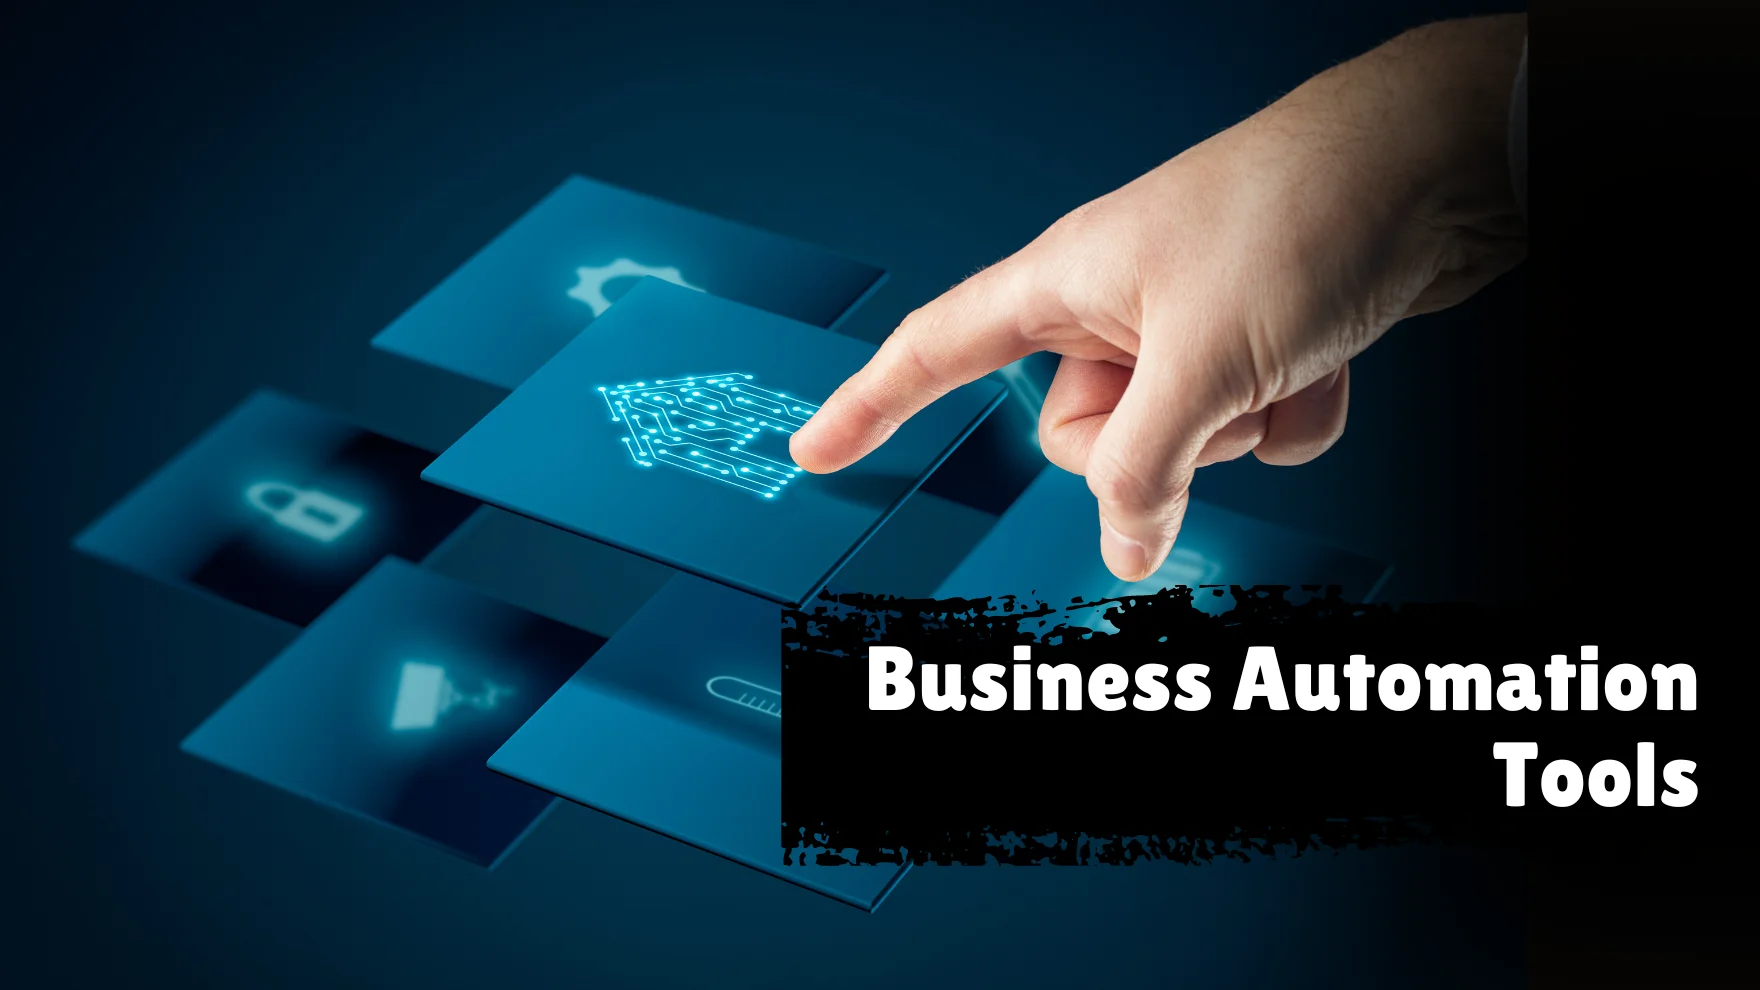 Business Automation Tools